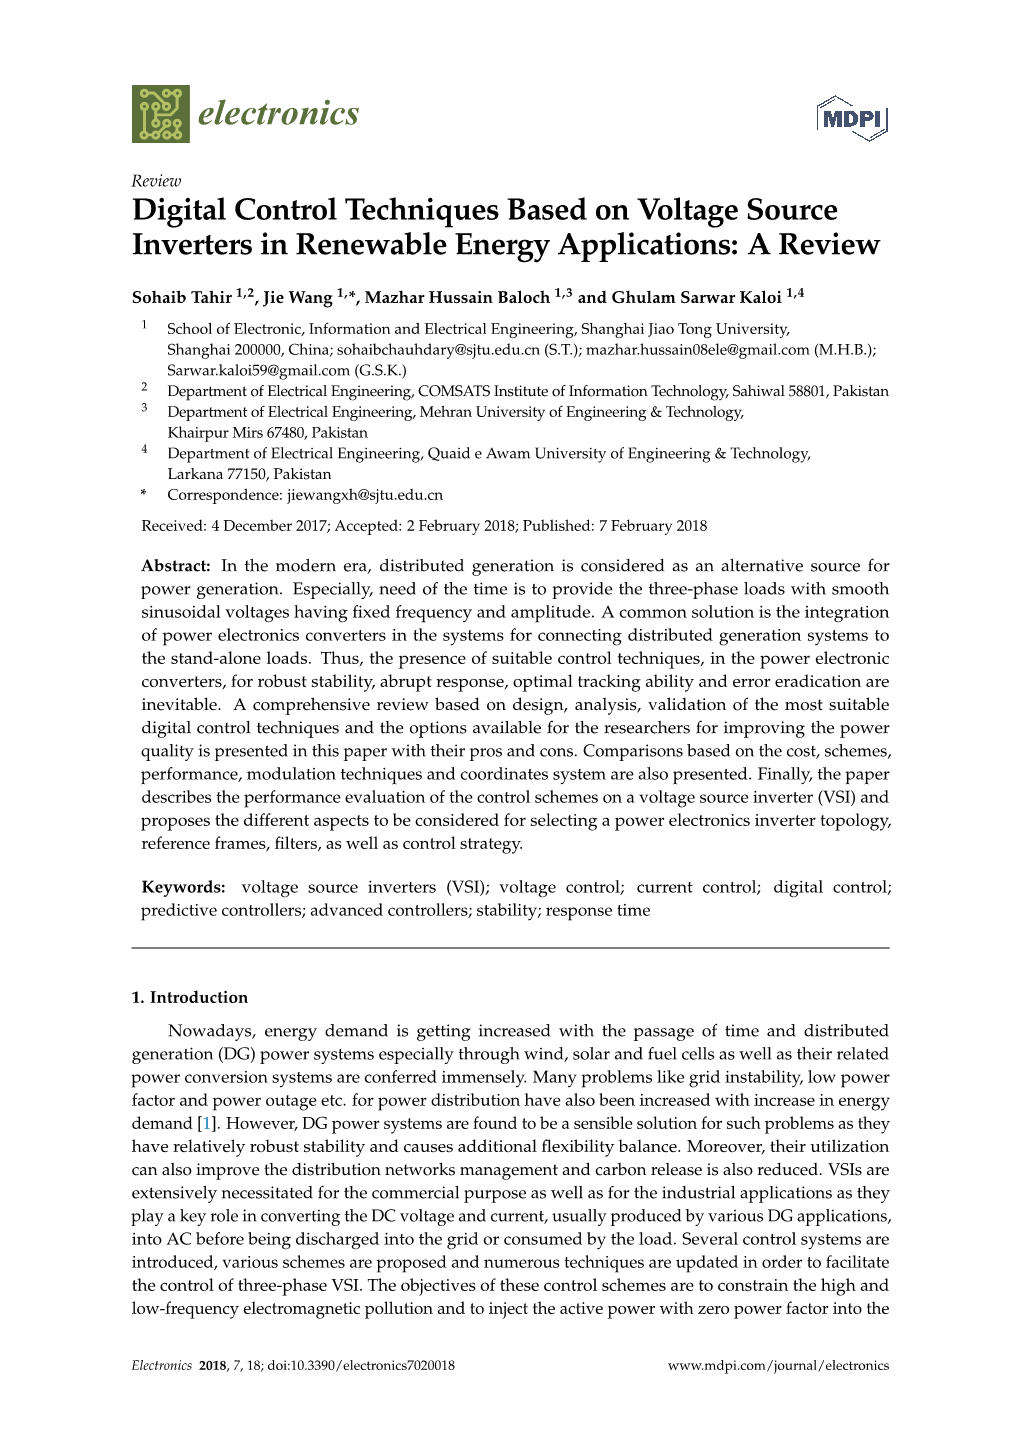 Digital Control Techniques Based on Voltage Source Inverters in Renewable Energy Applications: a Review